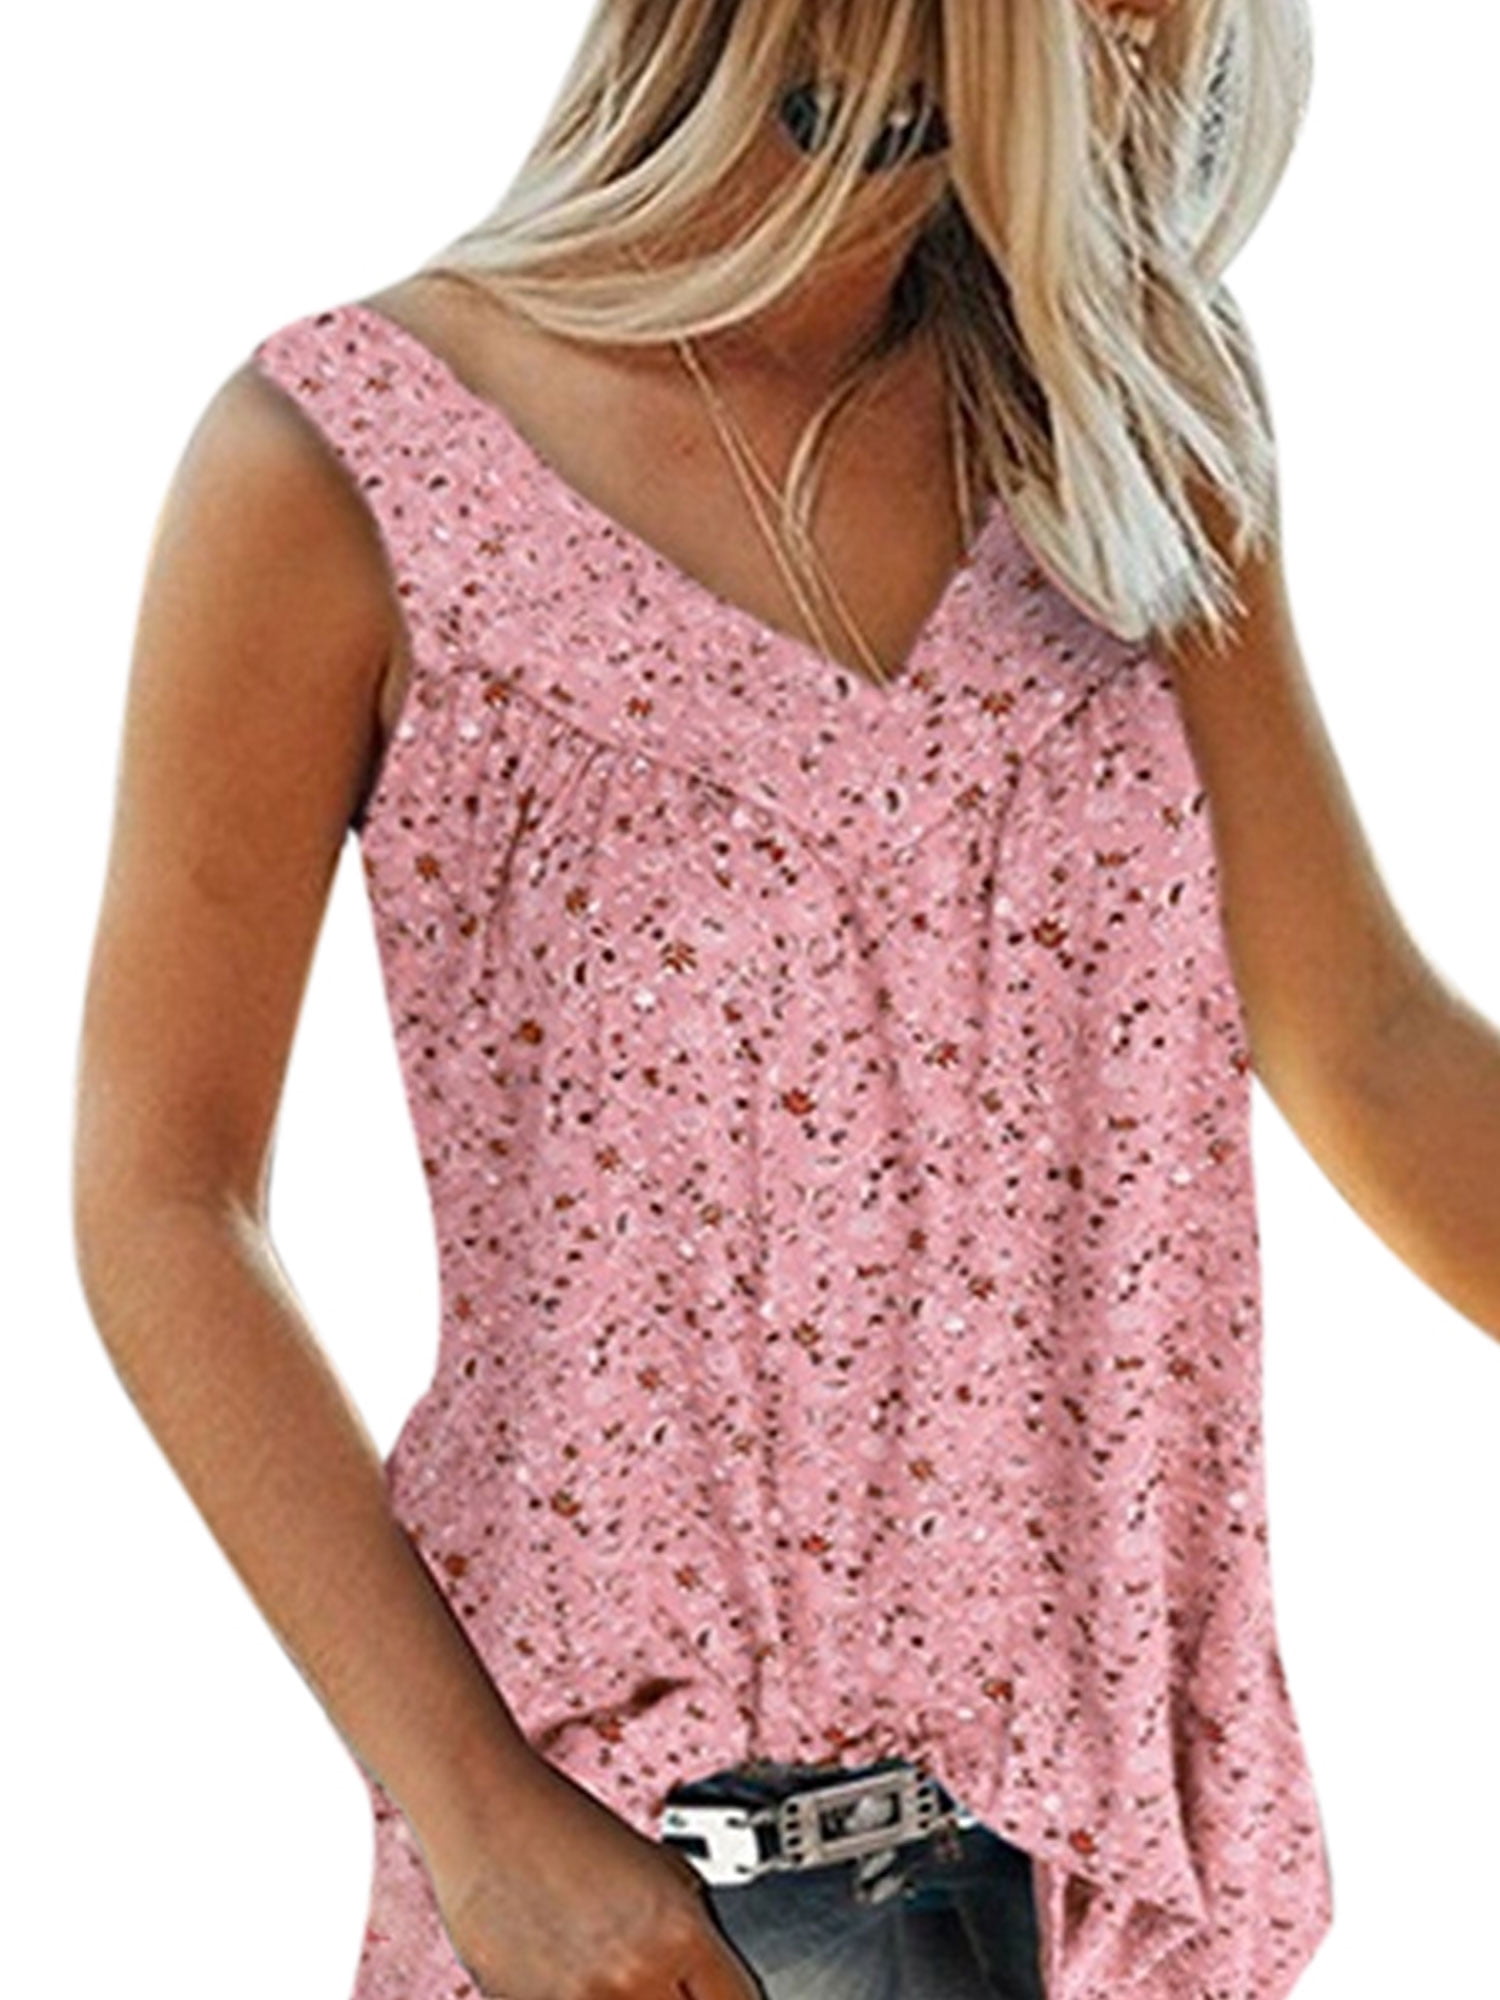 Women's Tank Tops O-Neck Casual Loose Sleeveless Printed Pattern Soft Blouse Shirts Plus Size 